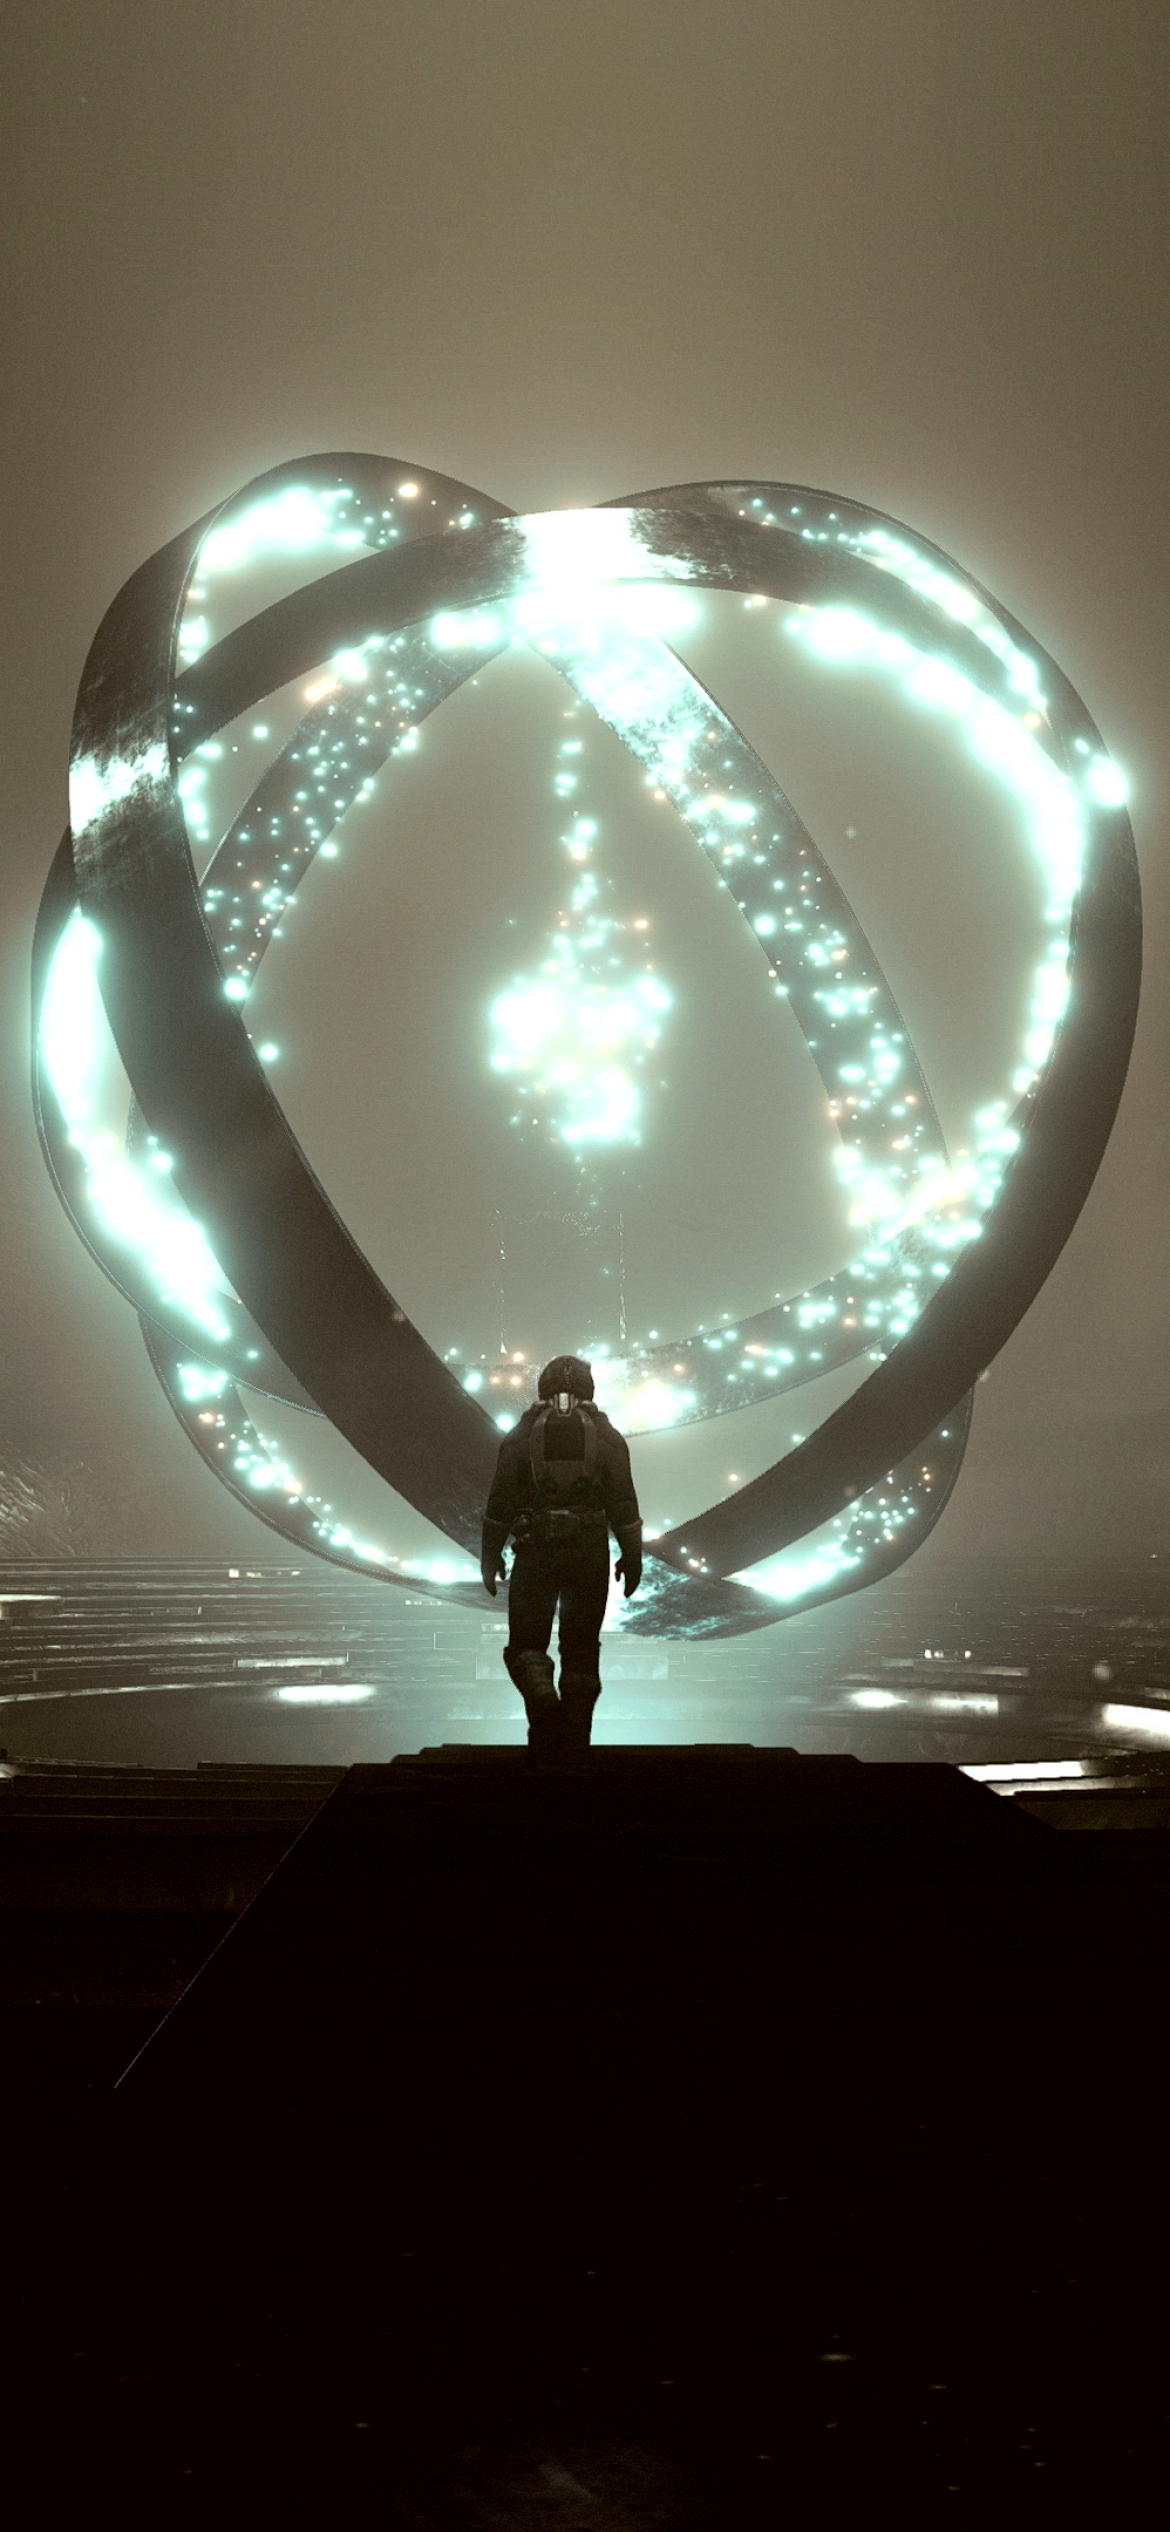 Silhouetted figure walking towards a glowing starfield portal in a dark ambiance, perfect for phone wallpaper.